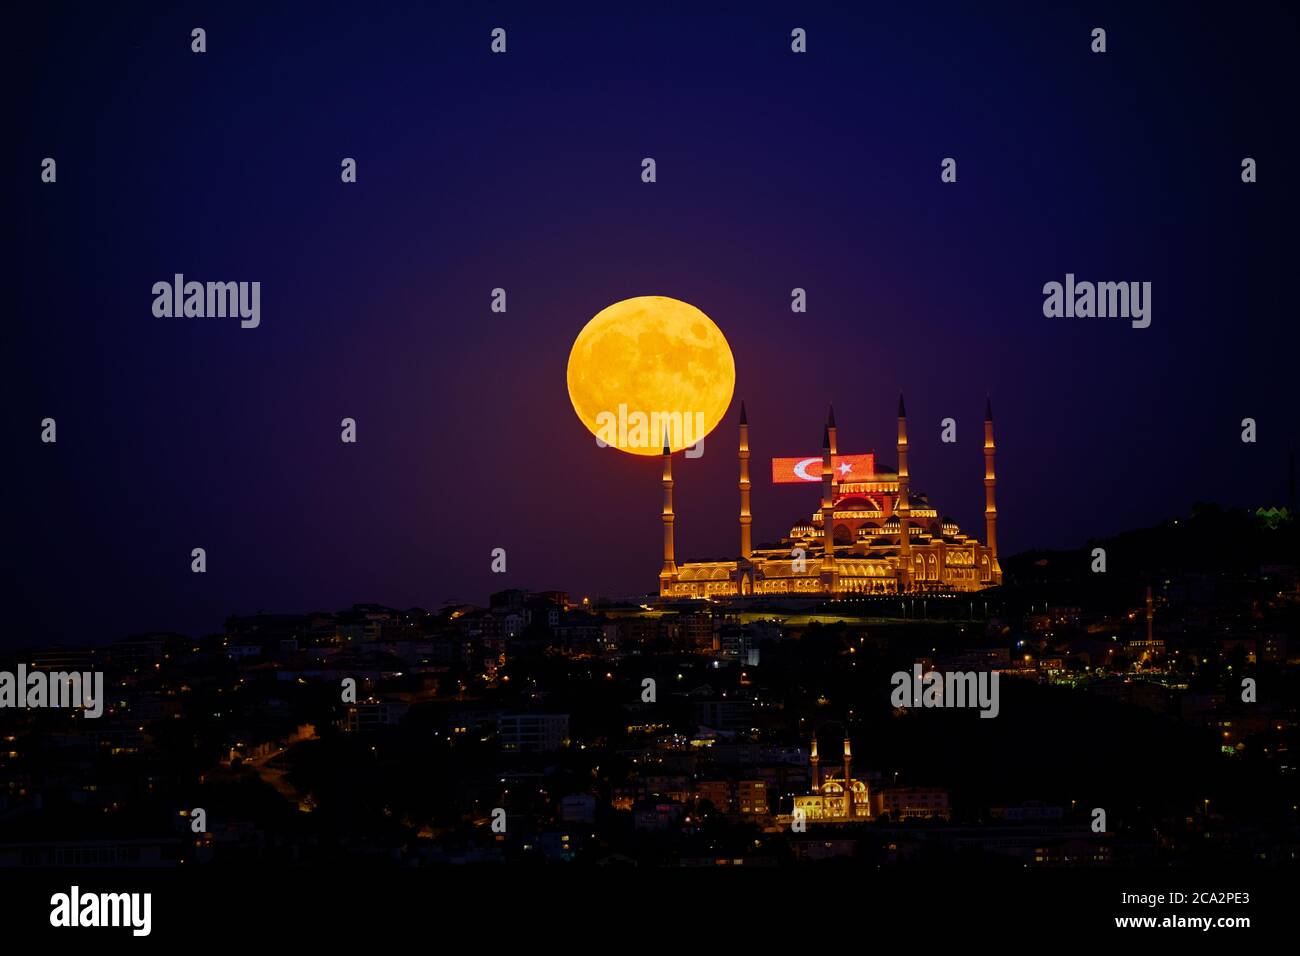 Camlica Mosque with a perfect evening full moon view from Istanbul. Stock Photo